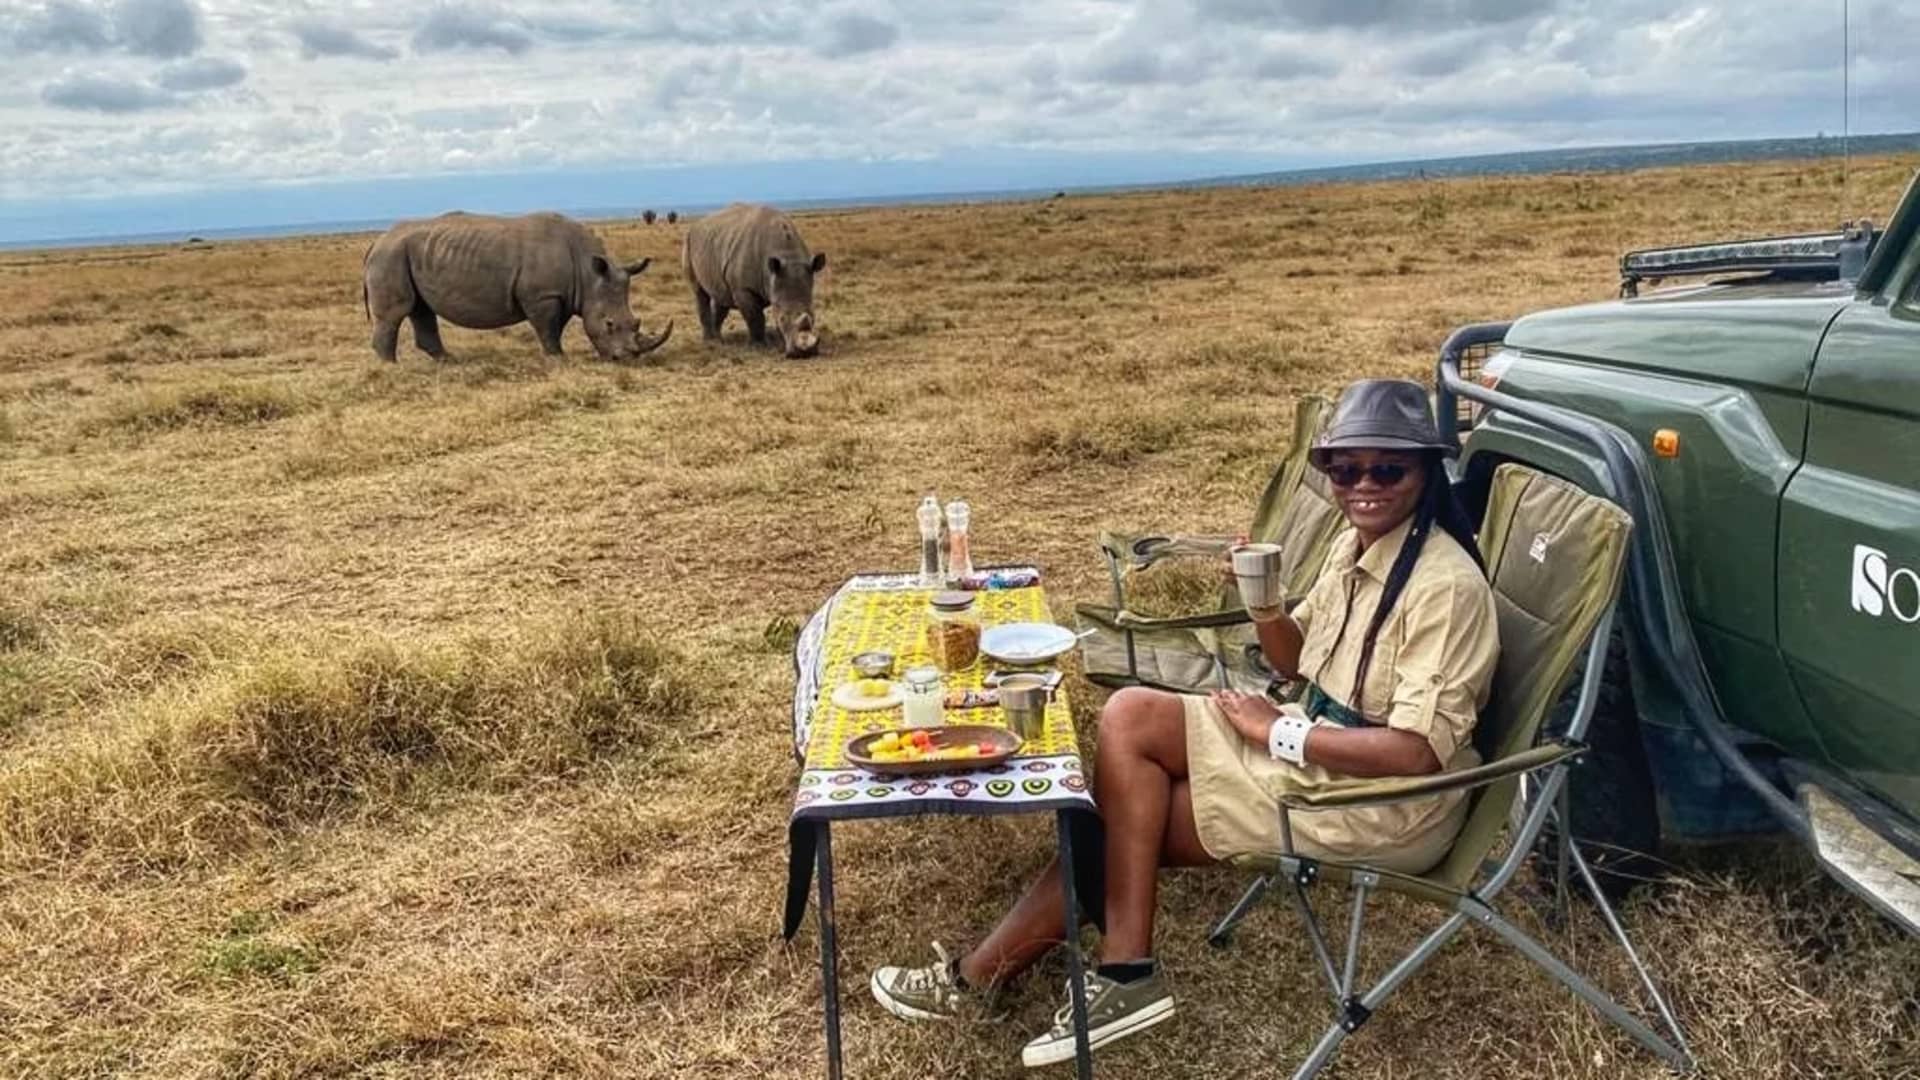 Harriet Akinyi having a bush breakfast with a view of the rhinos after a game drive in Solio Conservancy in Kenya.